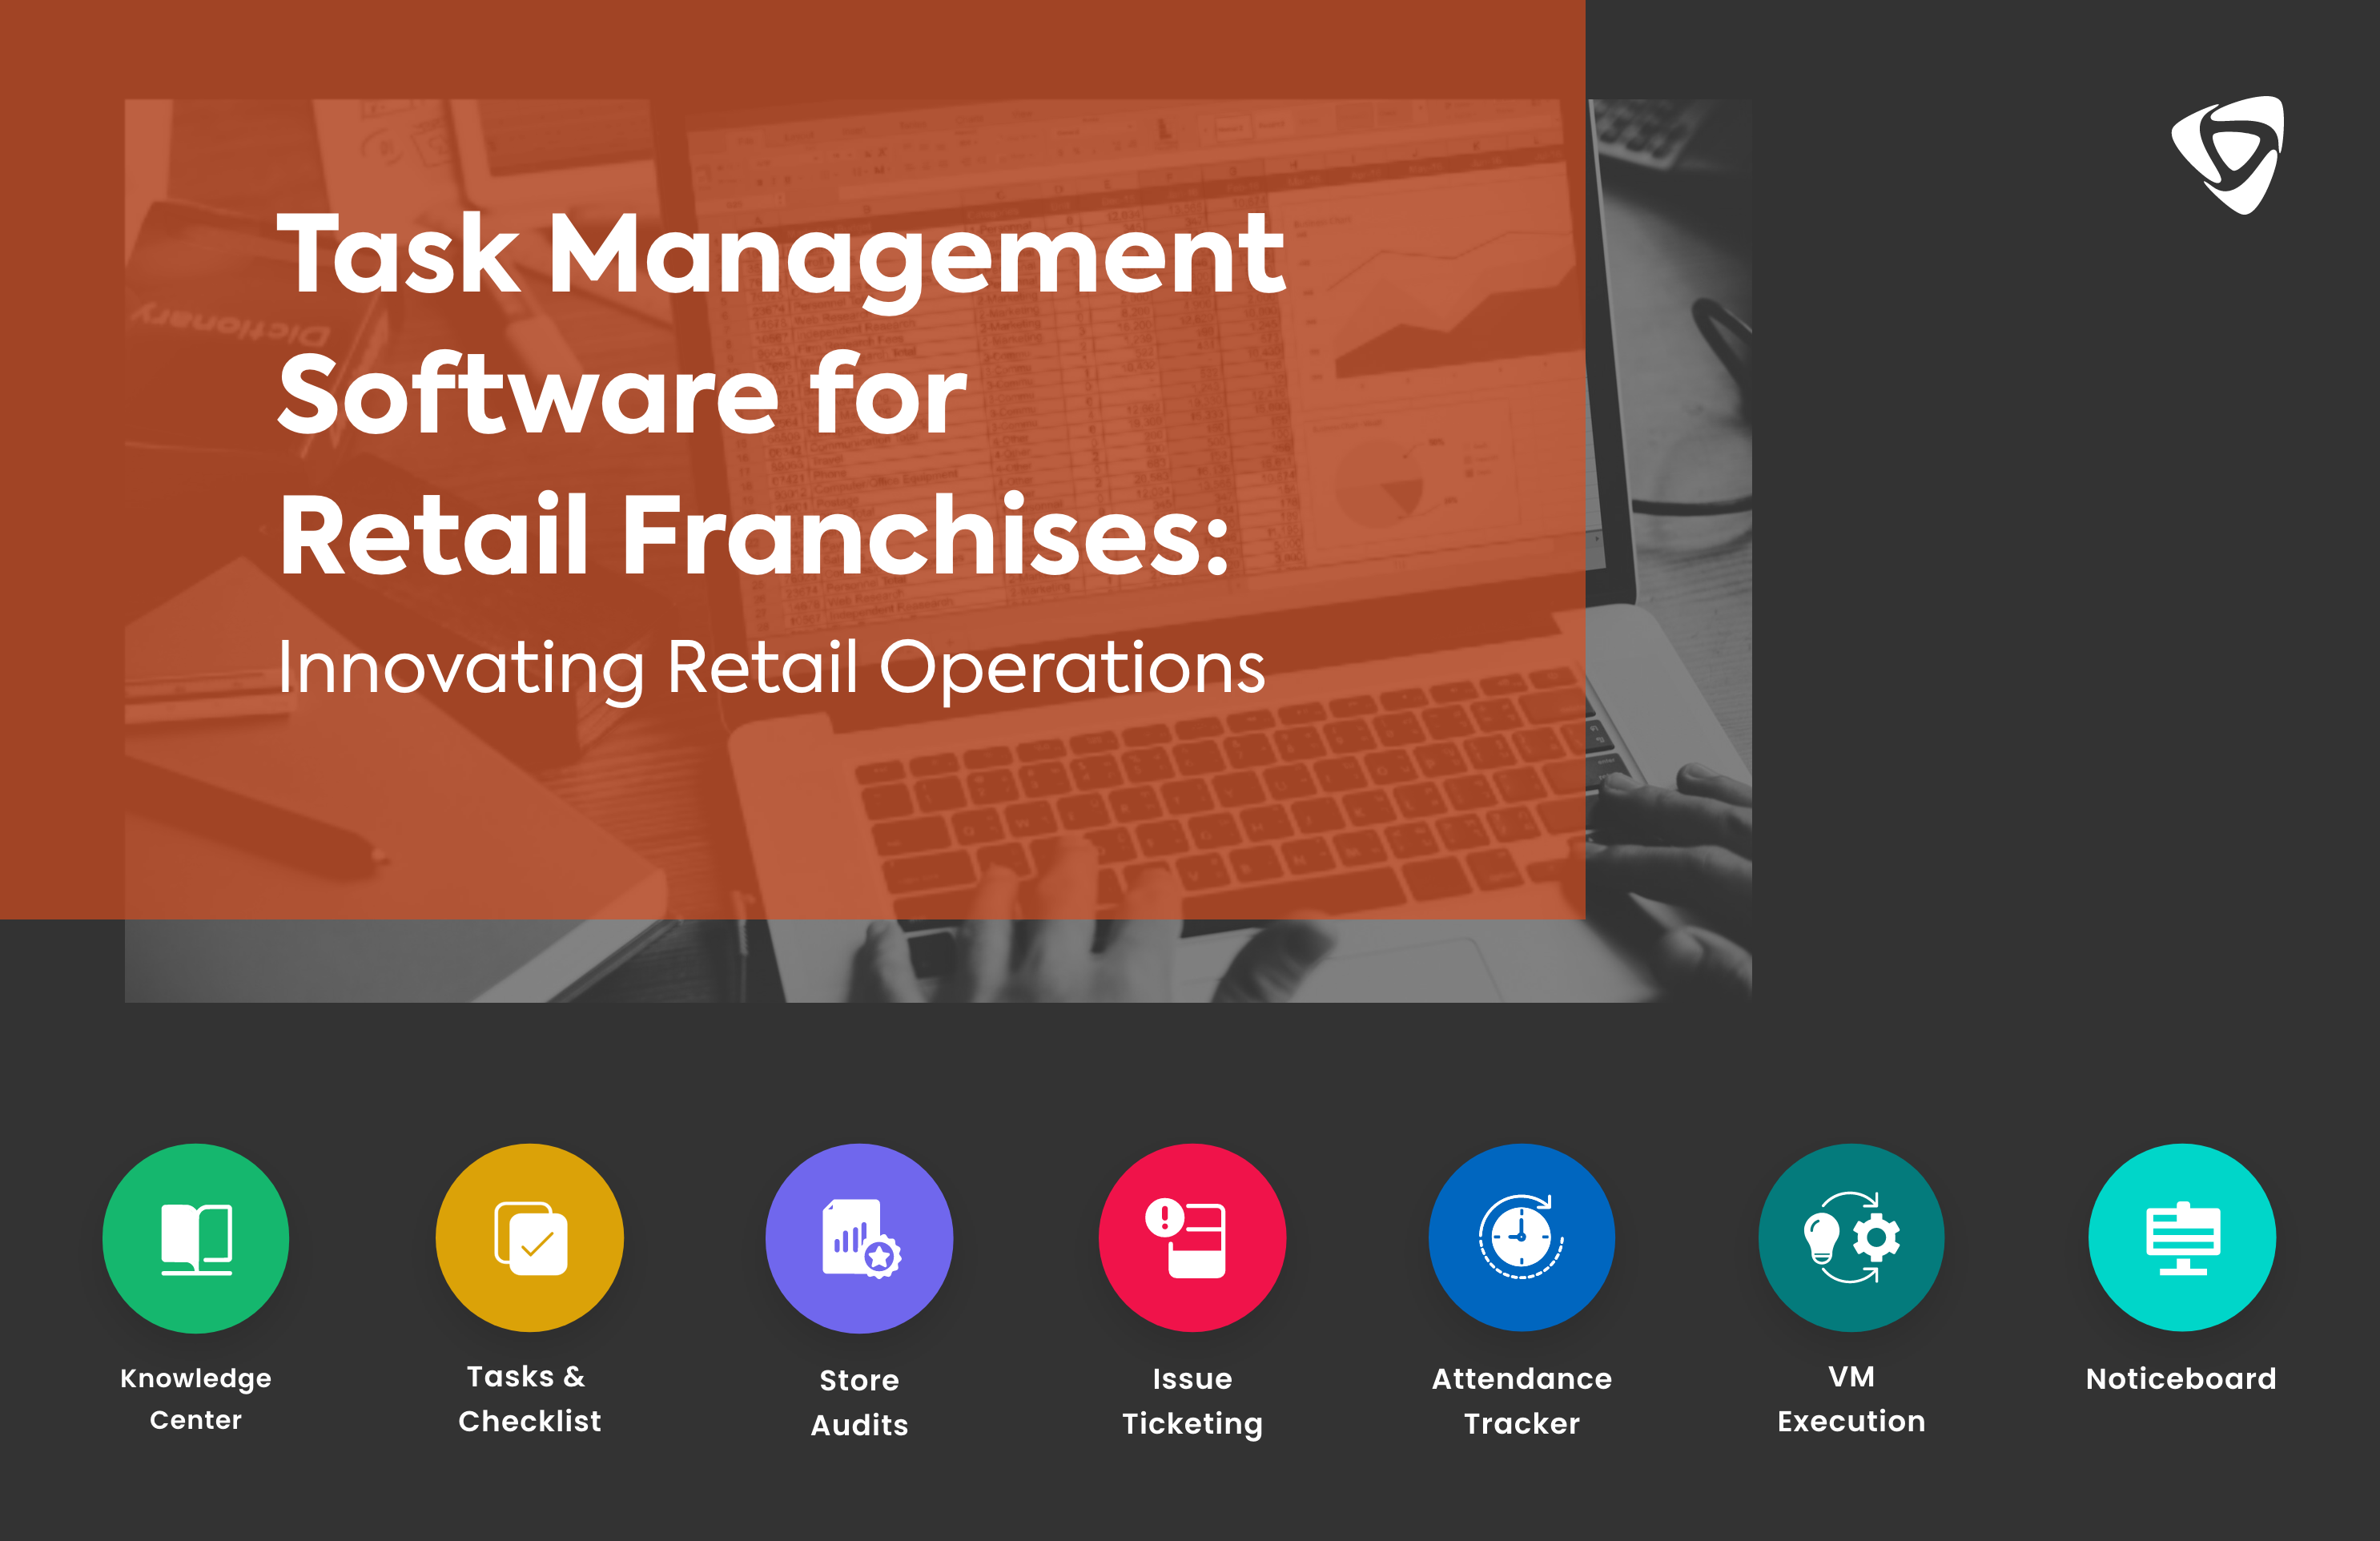 Task Management Software for Retail Franchises: Innovating Retail Operations